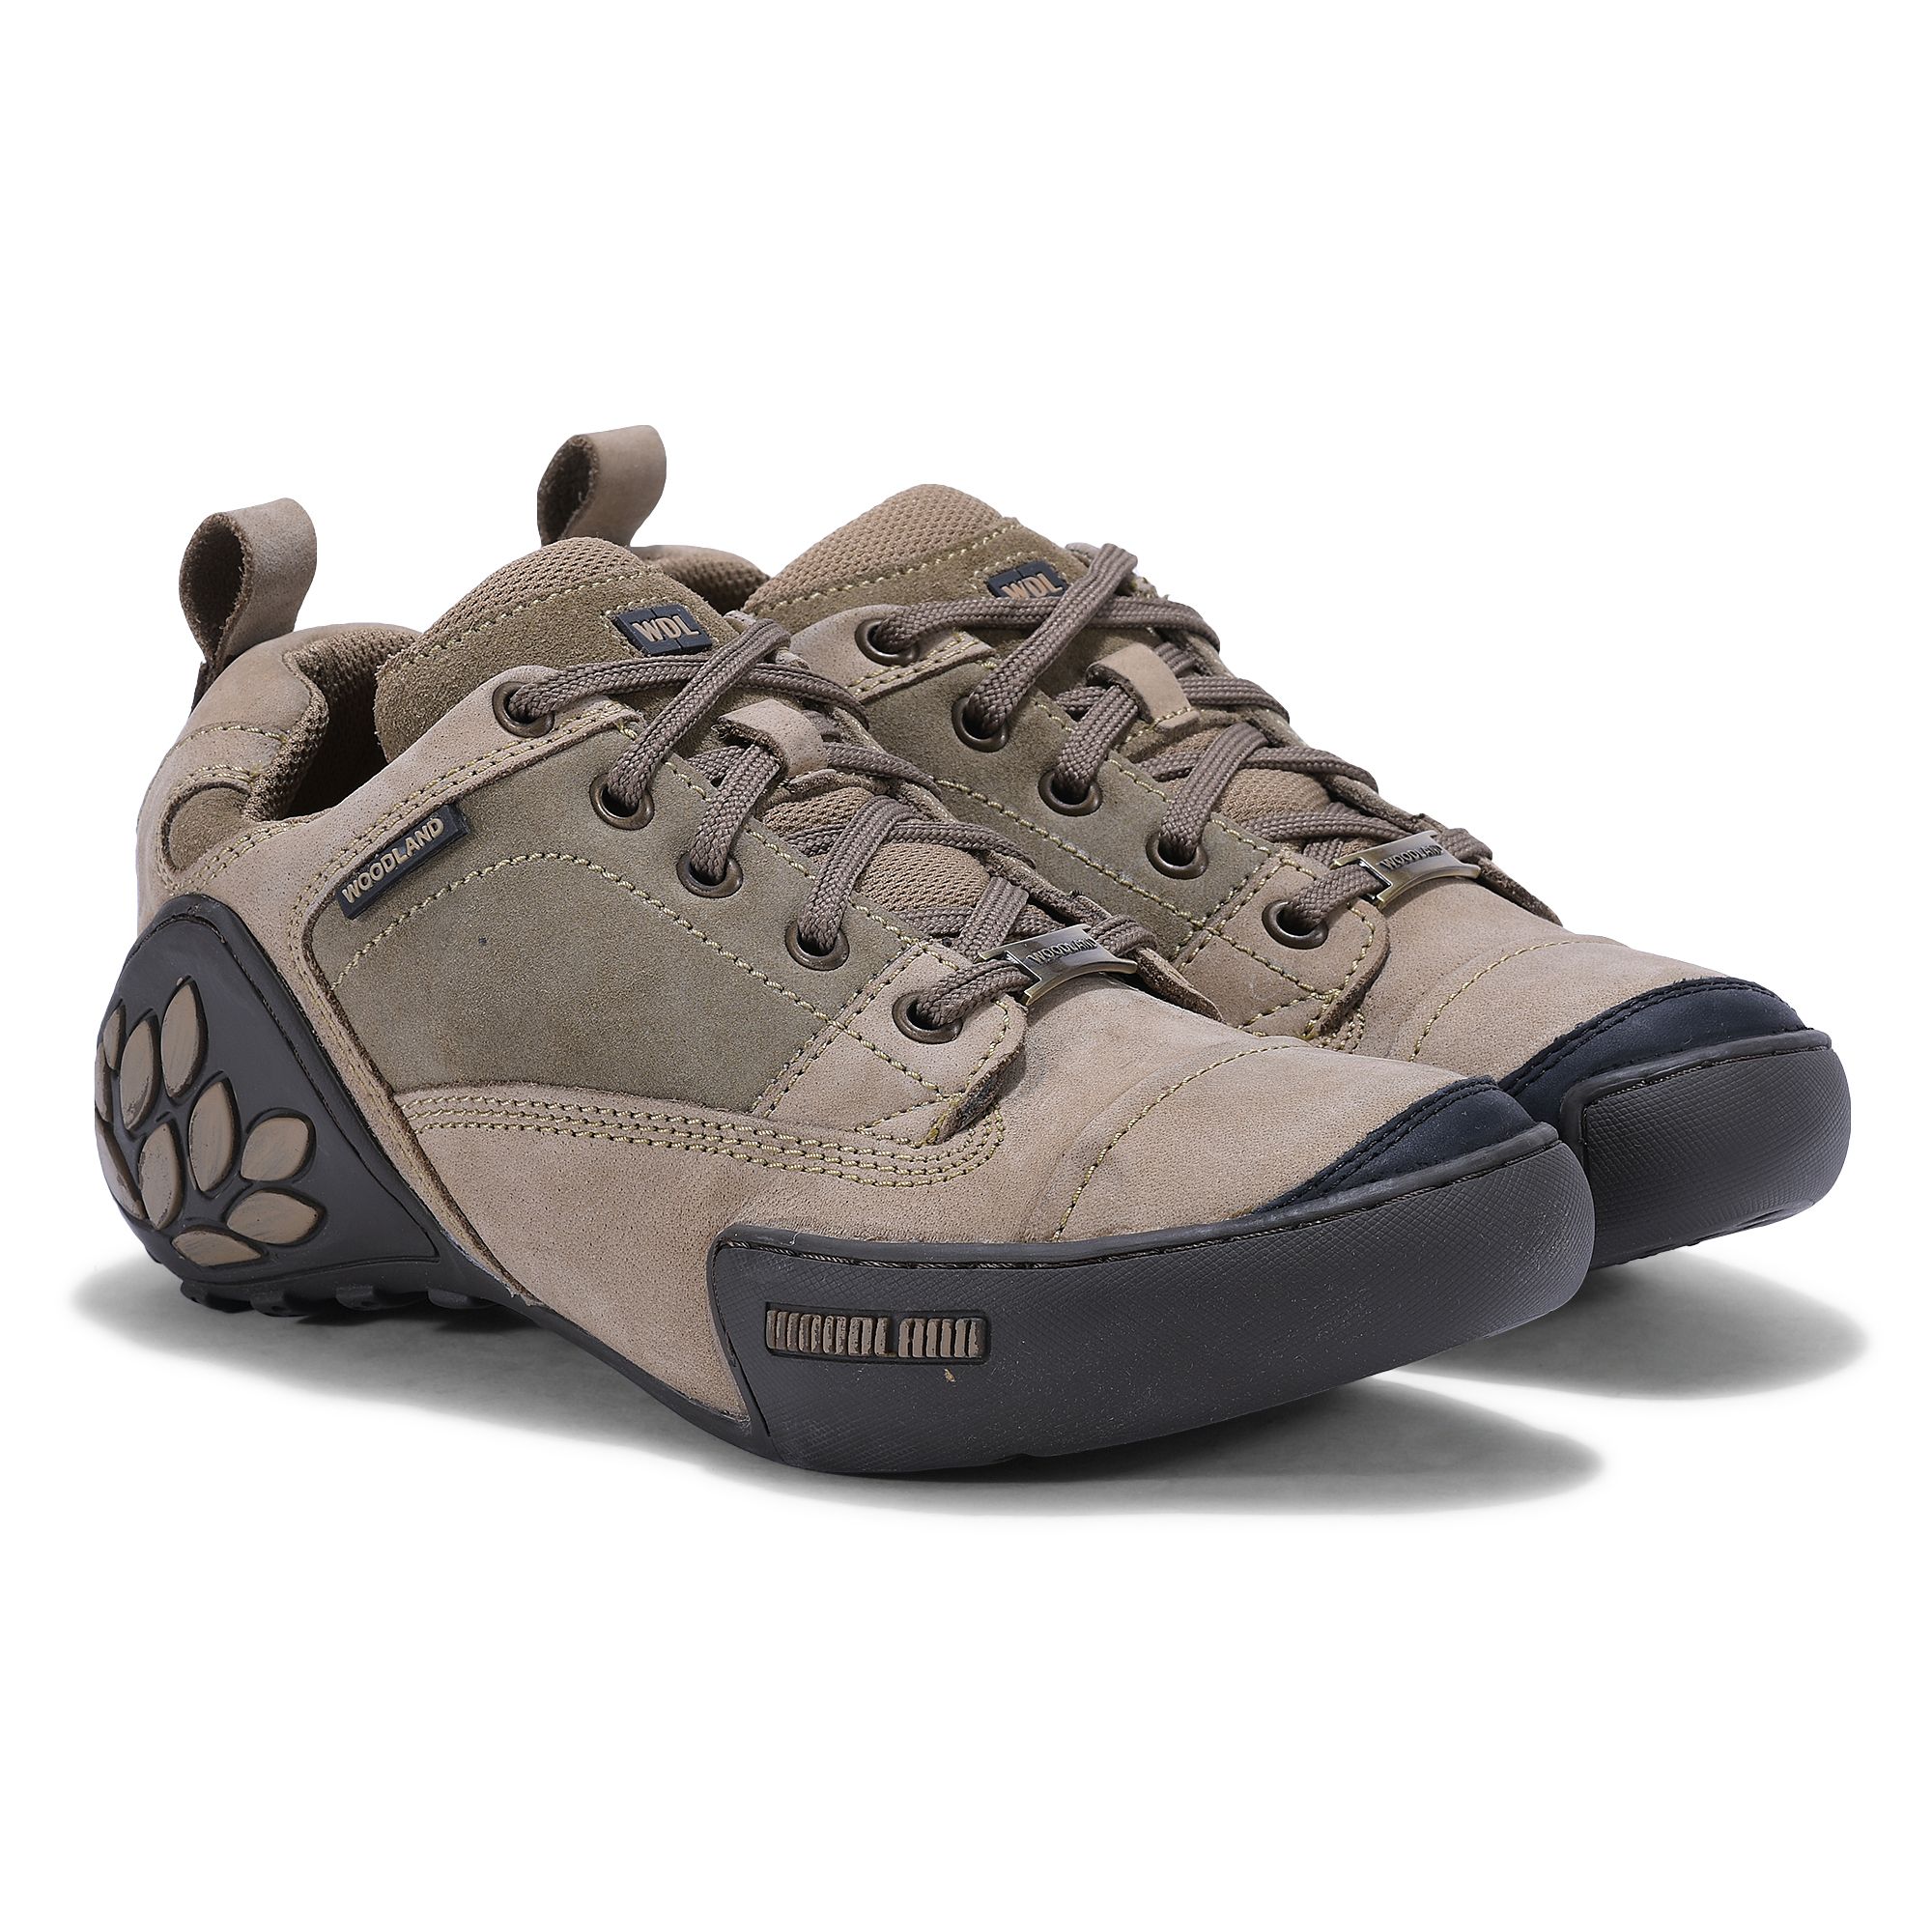 Woodland Shoes - Buy Genuine Woodland Shoes Online at Best Price | Myntra-saigonsouth.com.vn